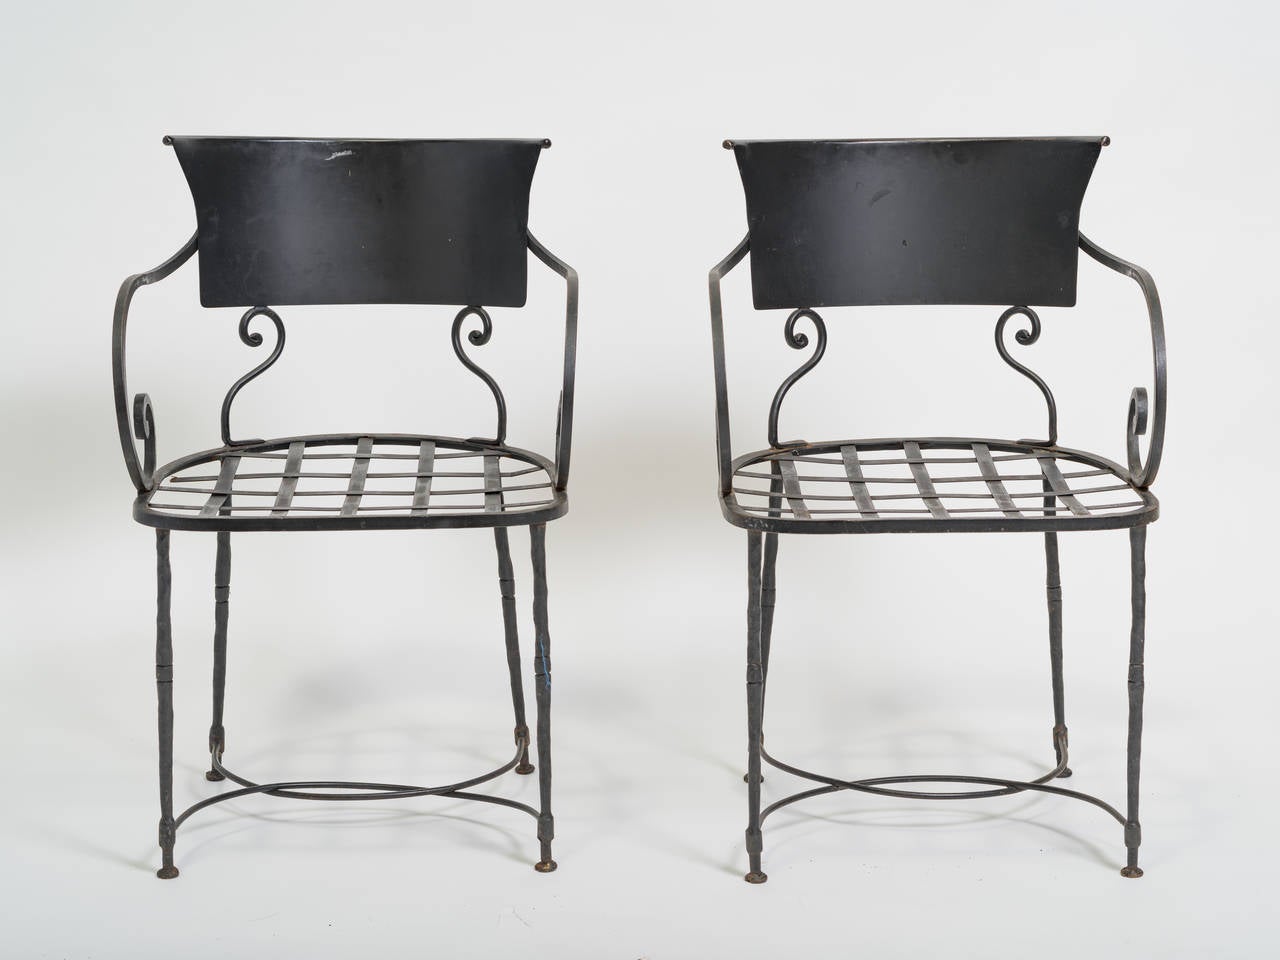 Six Italian iron chairs purchased from Bloomingdales in the early 1980s. Curvy, and heavy!